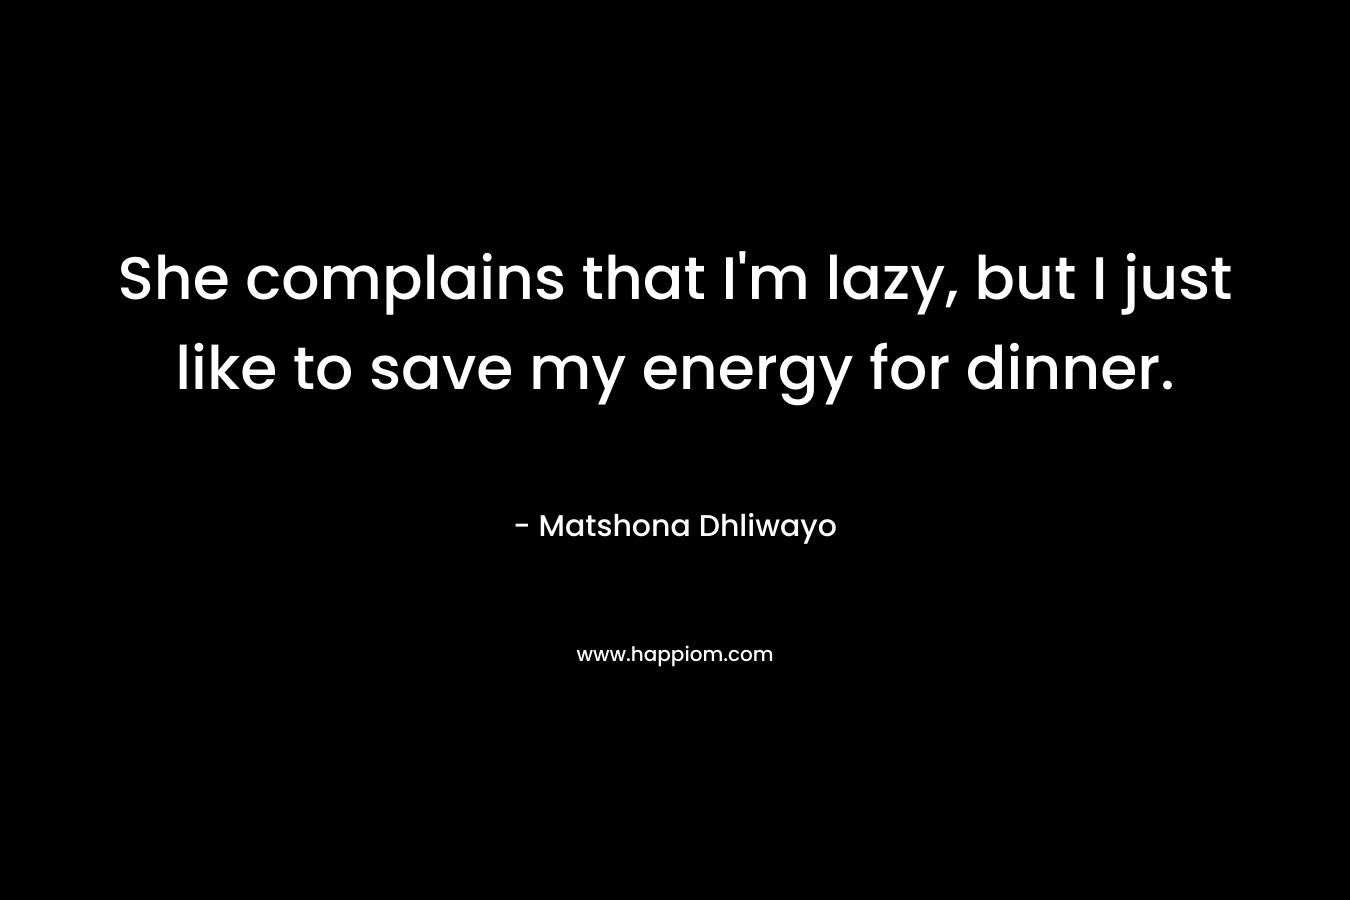 She complains that I’m lazy, but I just like to save my energy for dinner. – Matshona Dhliwayo